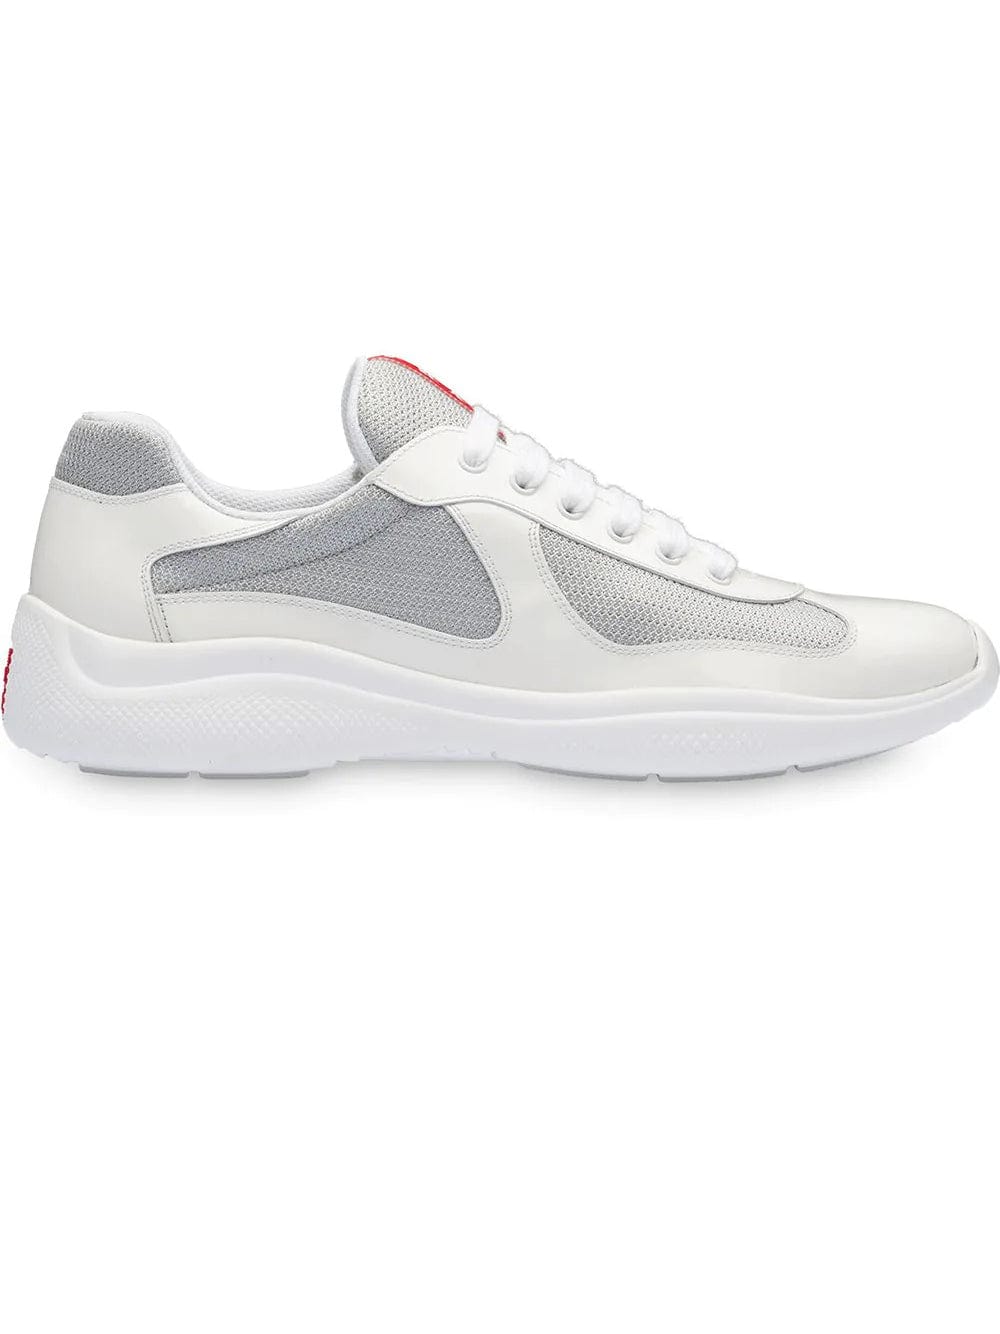 Prada America's Cup White Leather Patent Sneakers – Aztec Clothing